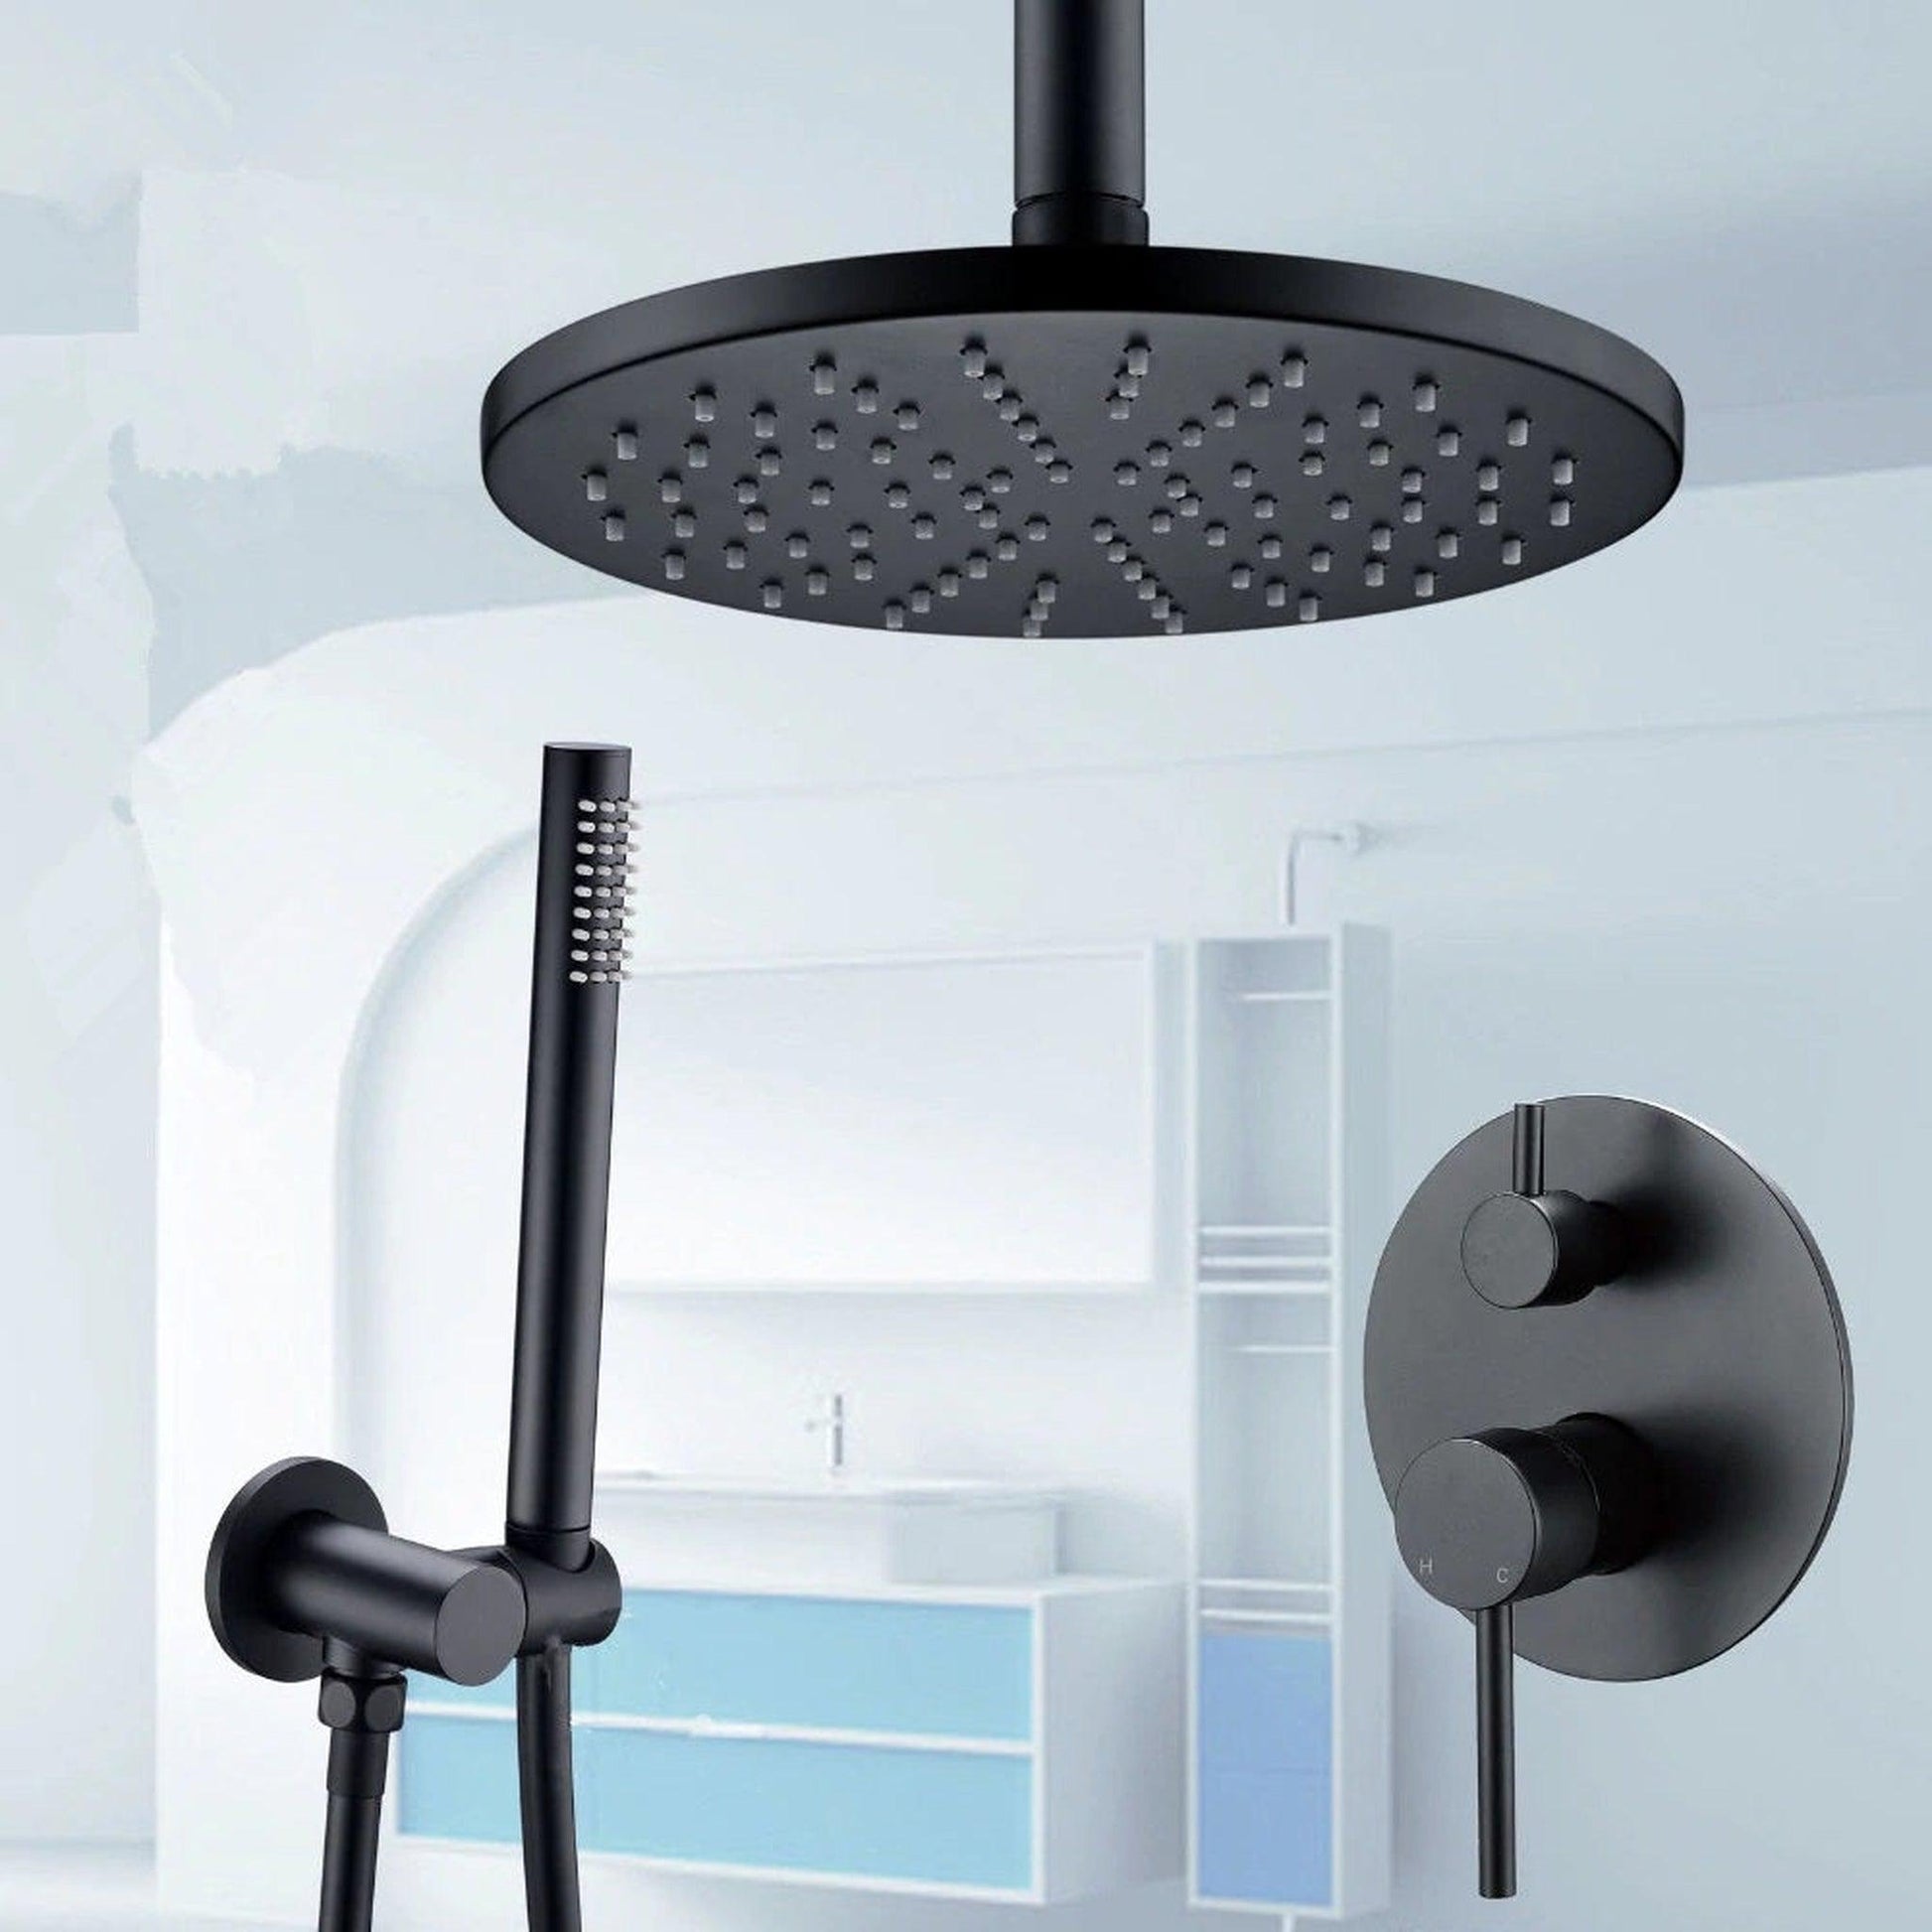 FontanaShowers Verona Creative Luxury 8" Dark Oil Rubbed Bronze Round Ceiling Mounted Shower Head Hot and Cold Mixer Rainfall Shower System With Hand Shower